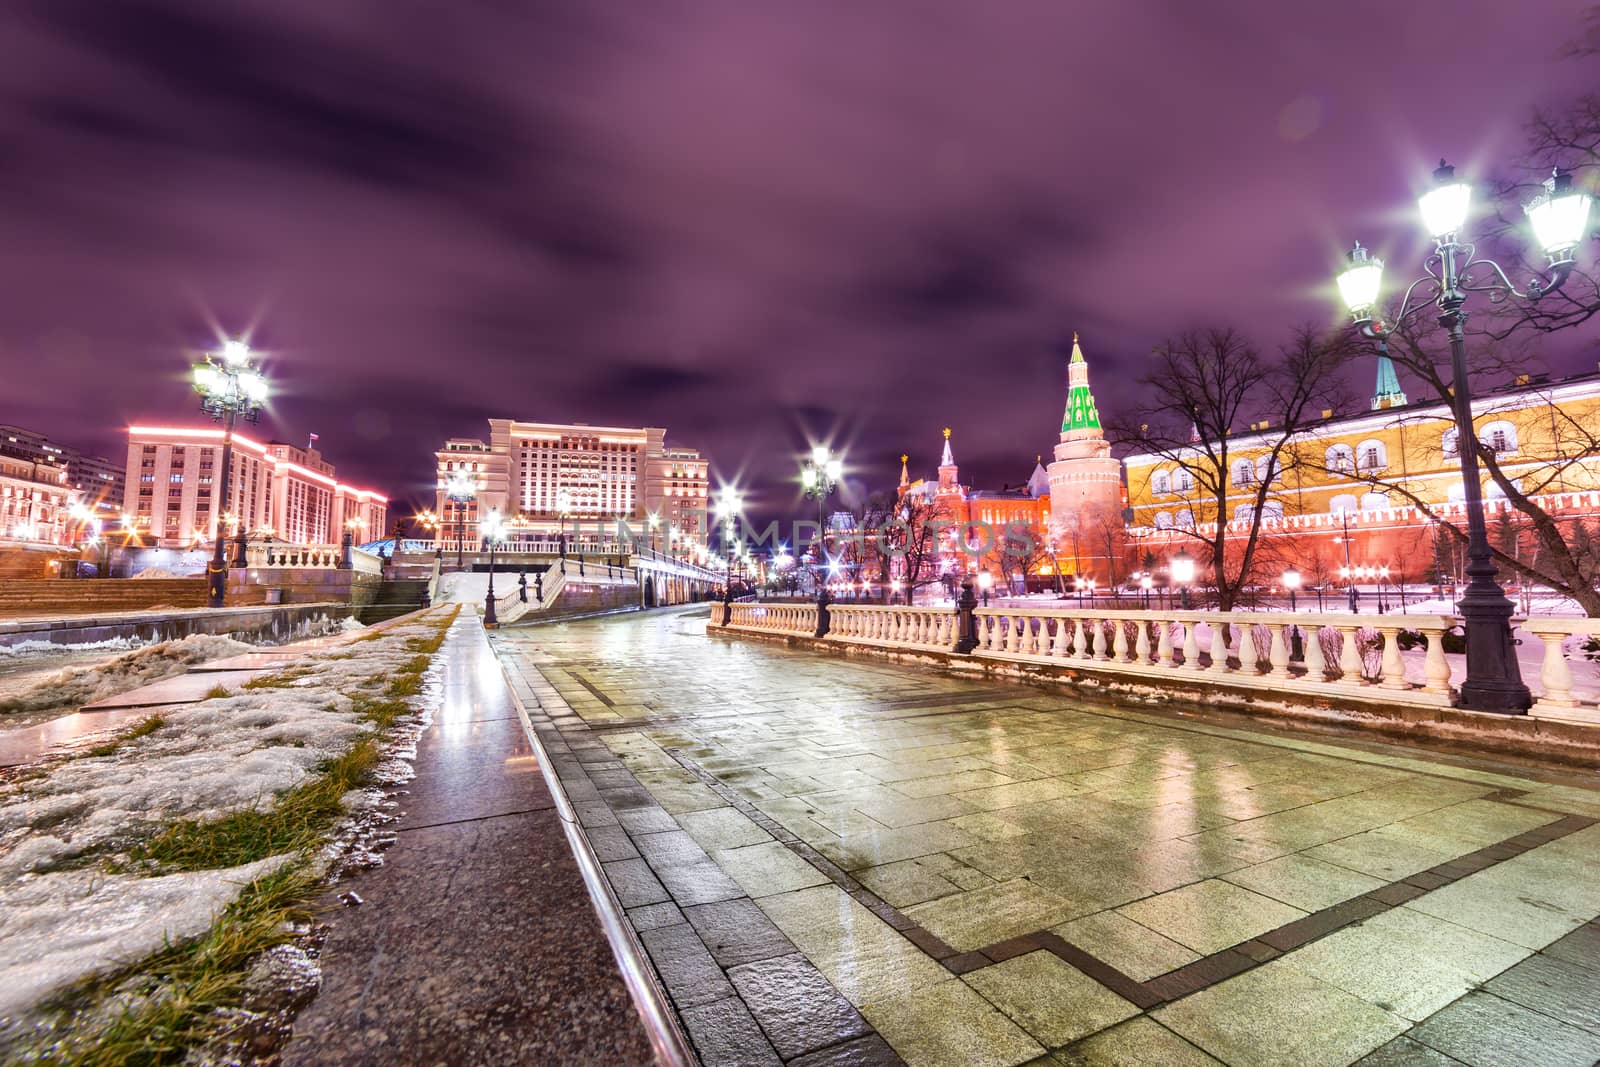 Moscow city center by night by marugod83